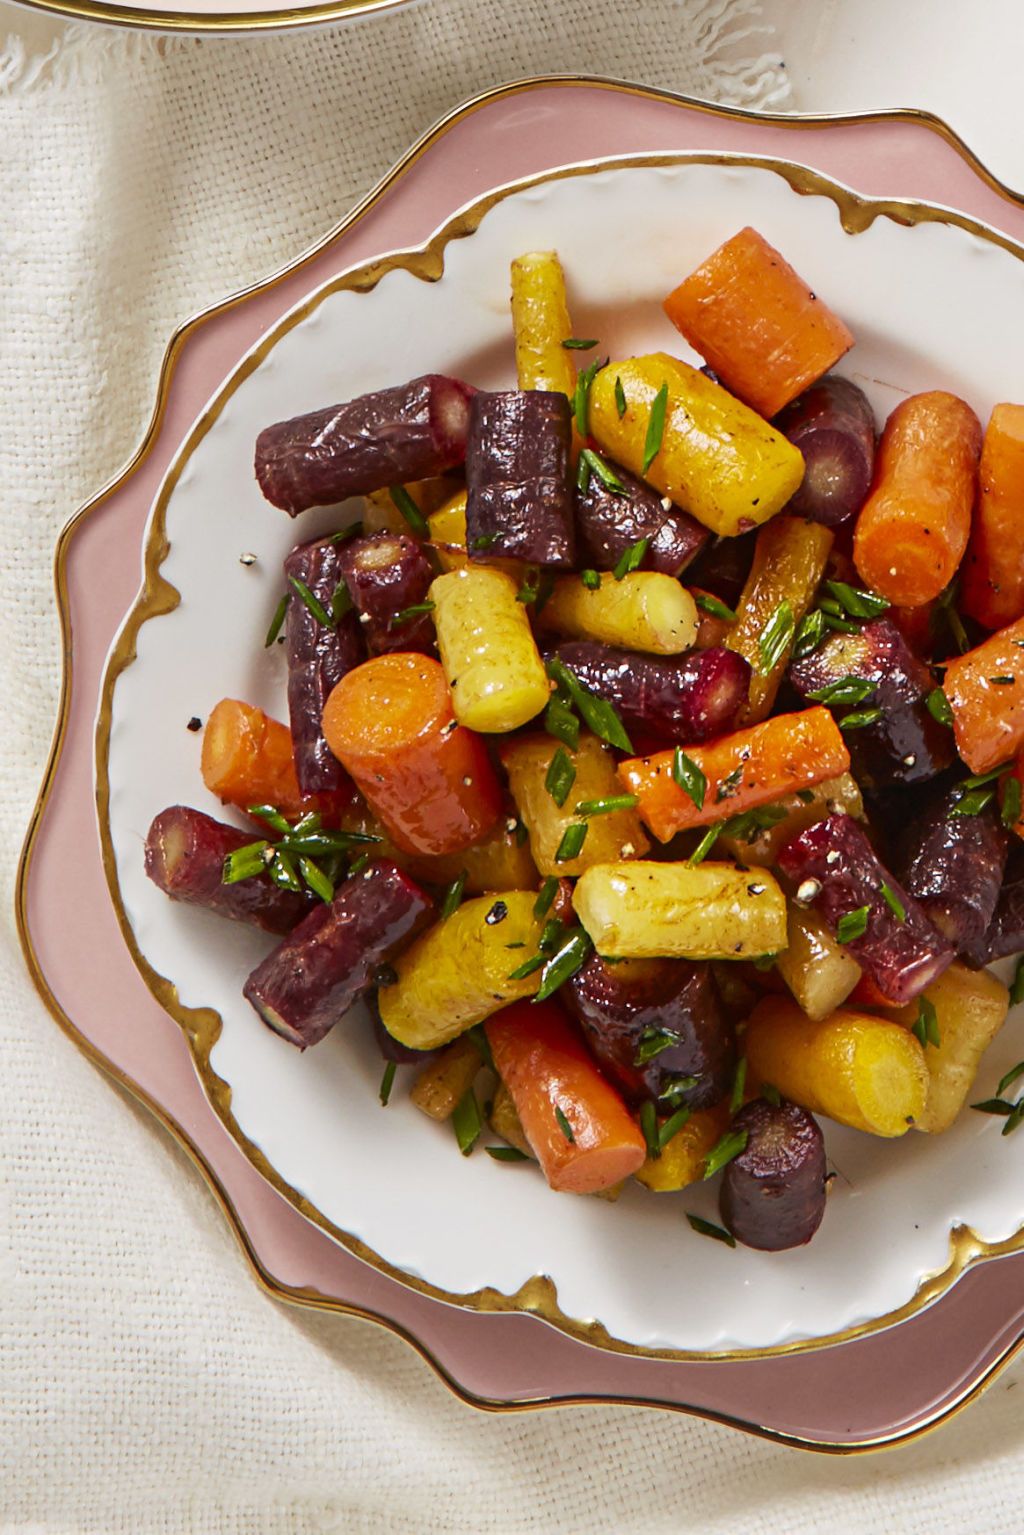 butter glazed rainbow carrots on a white plate